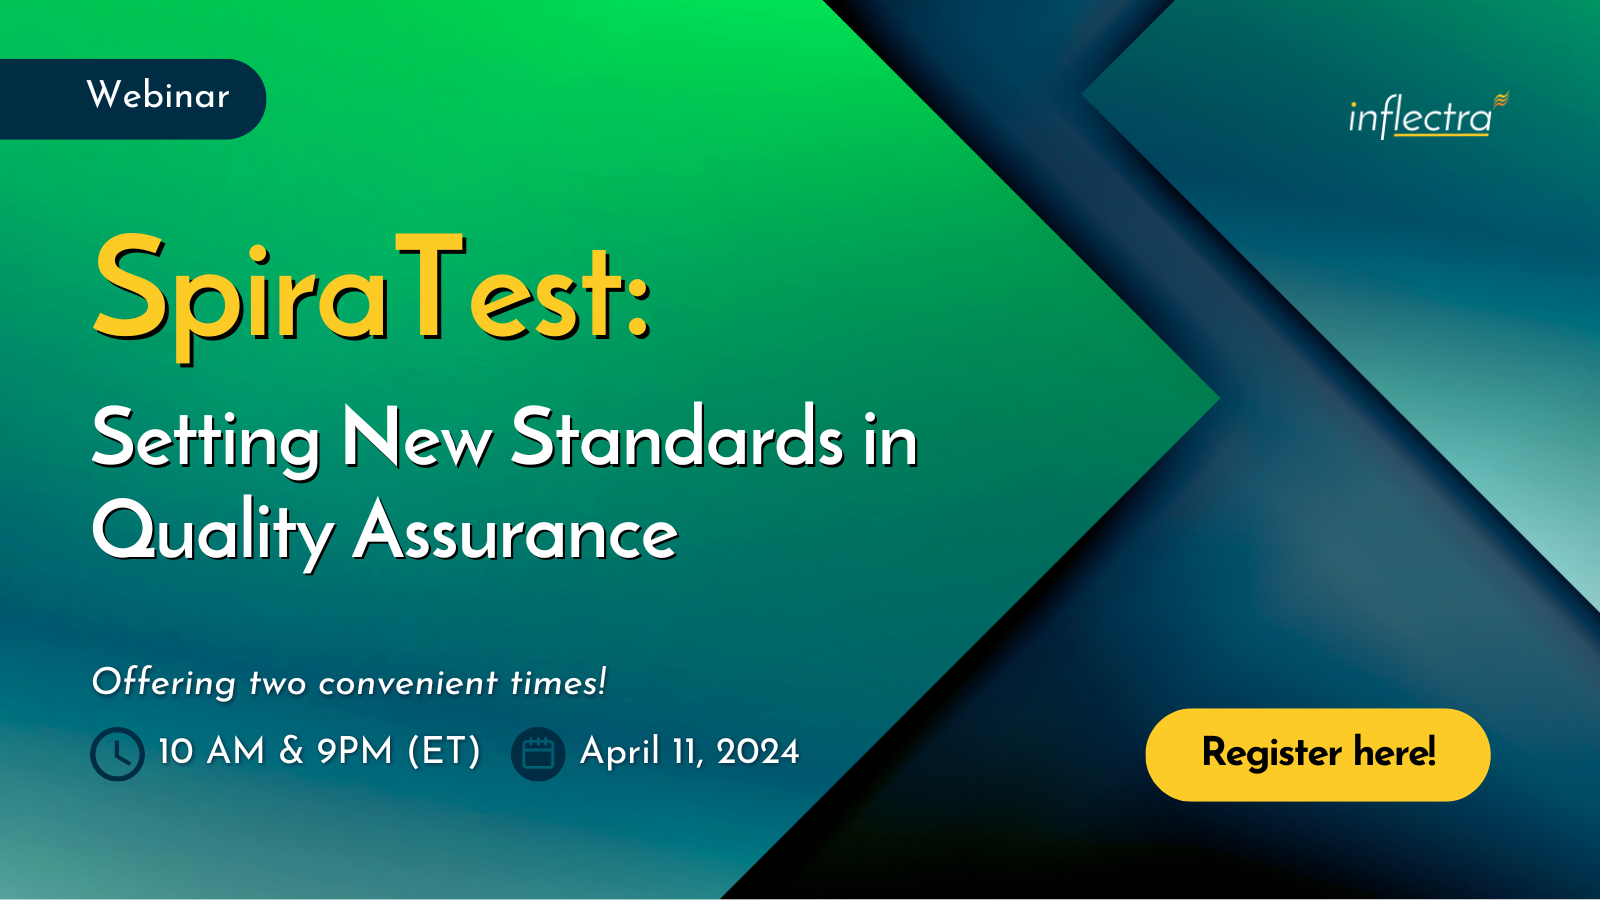 Inflectra Webinar: Spira Test: Setting New Standards in Quality Assurance. Two sessions offered on April 11, 2024 at 10 AM and 9 PM Eastern Time. Register here.